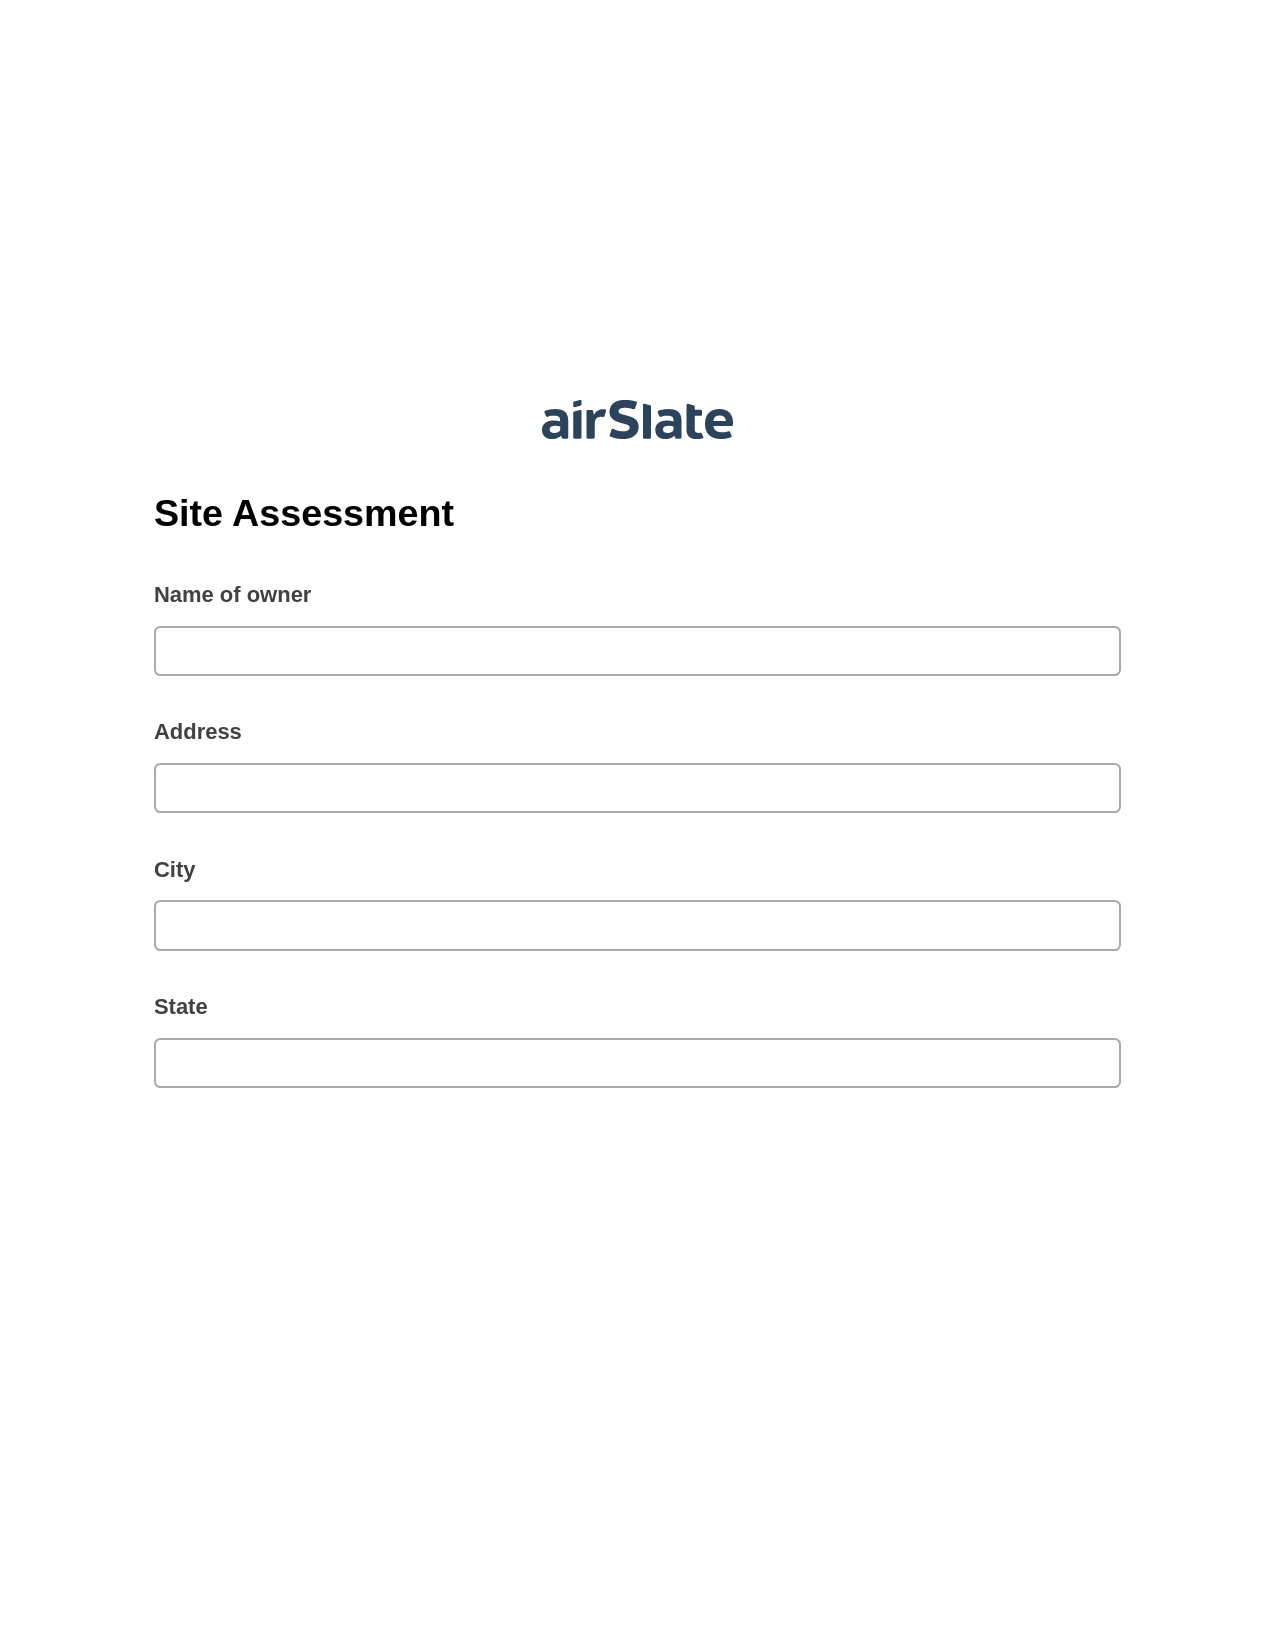 Site Assessment Pre-fill from Salesforce Records with SOQL Bot, Reminder Bot, Archive to SharePoint Folder Bot